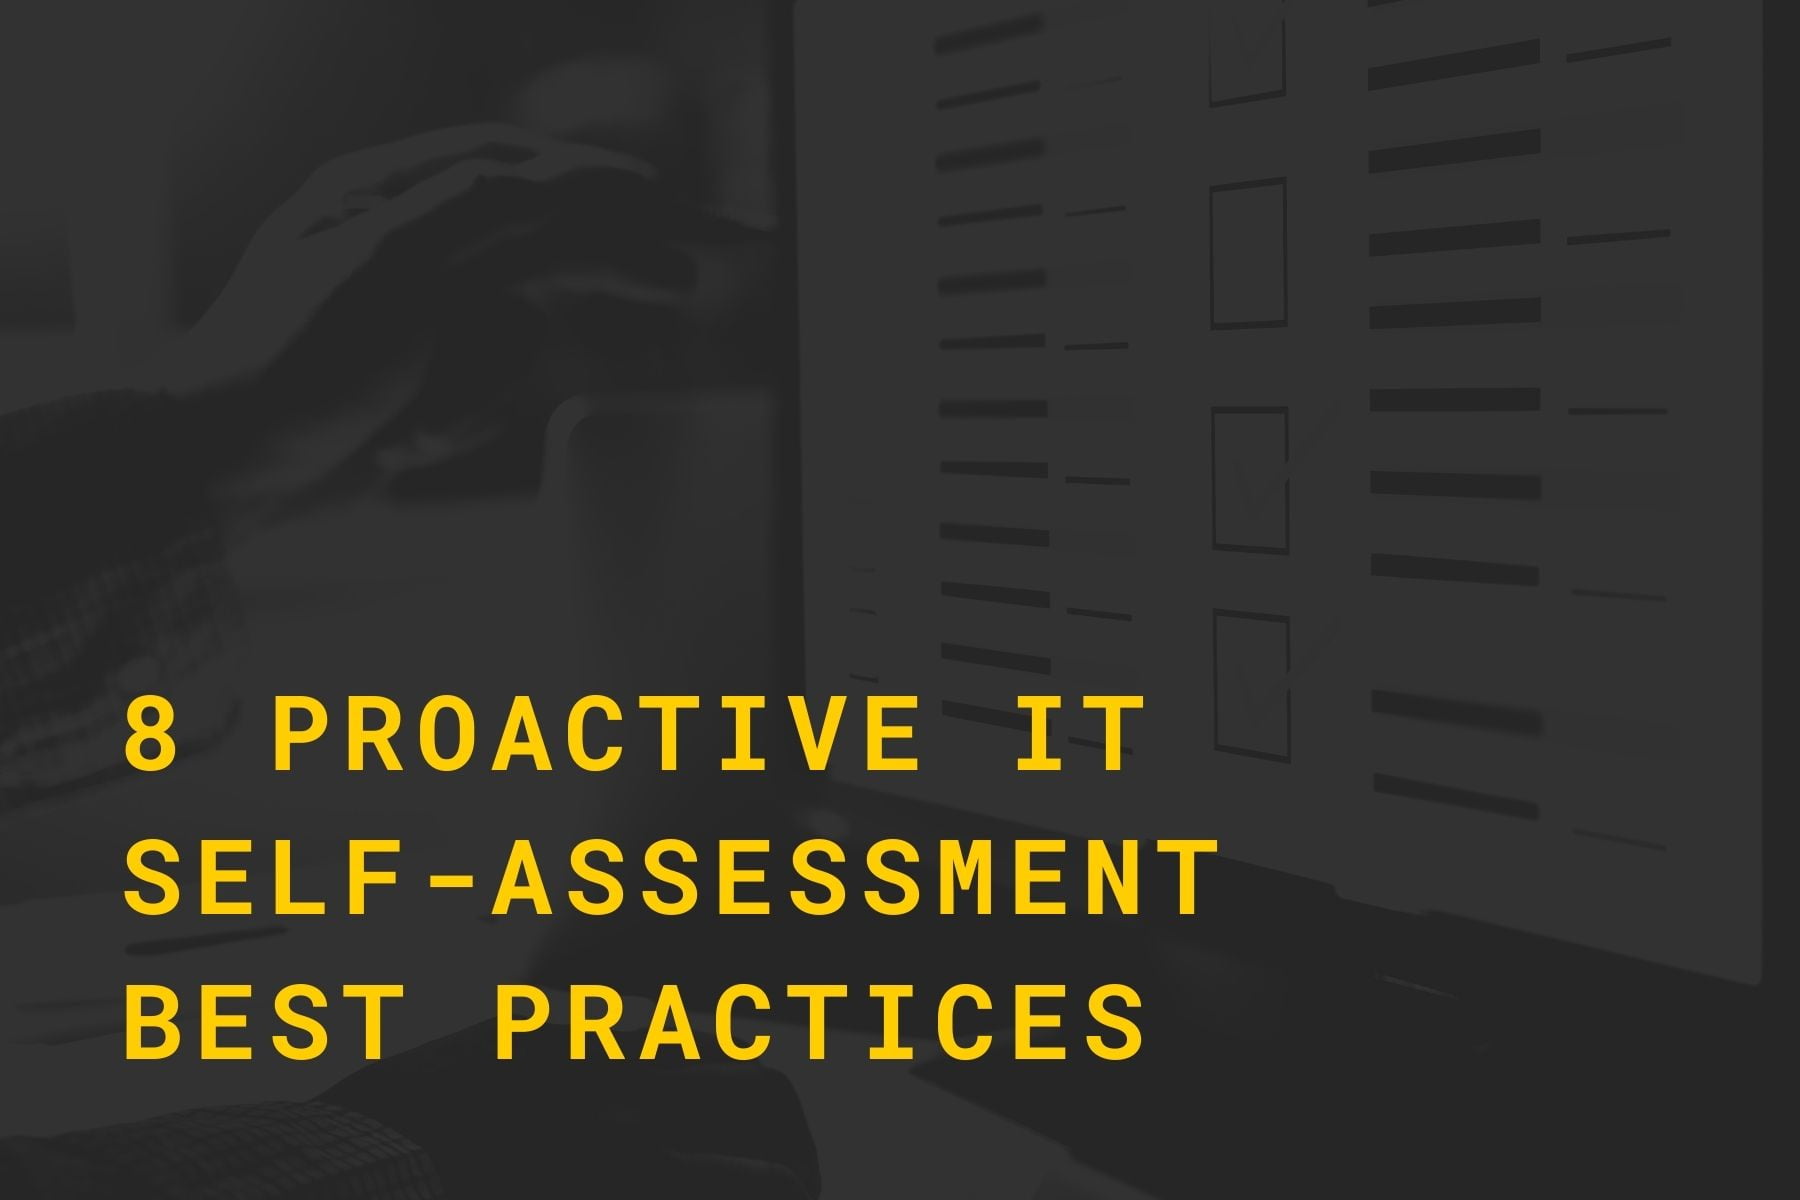 IT Self-Assessments for IT services and IT security